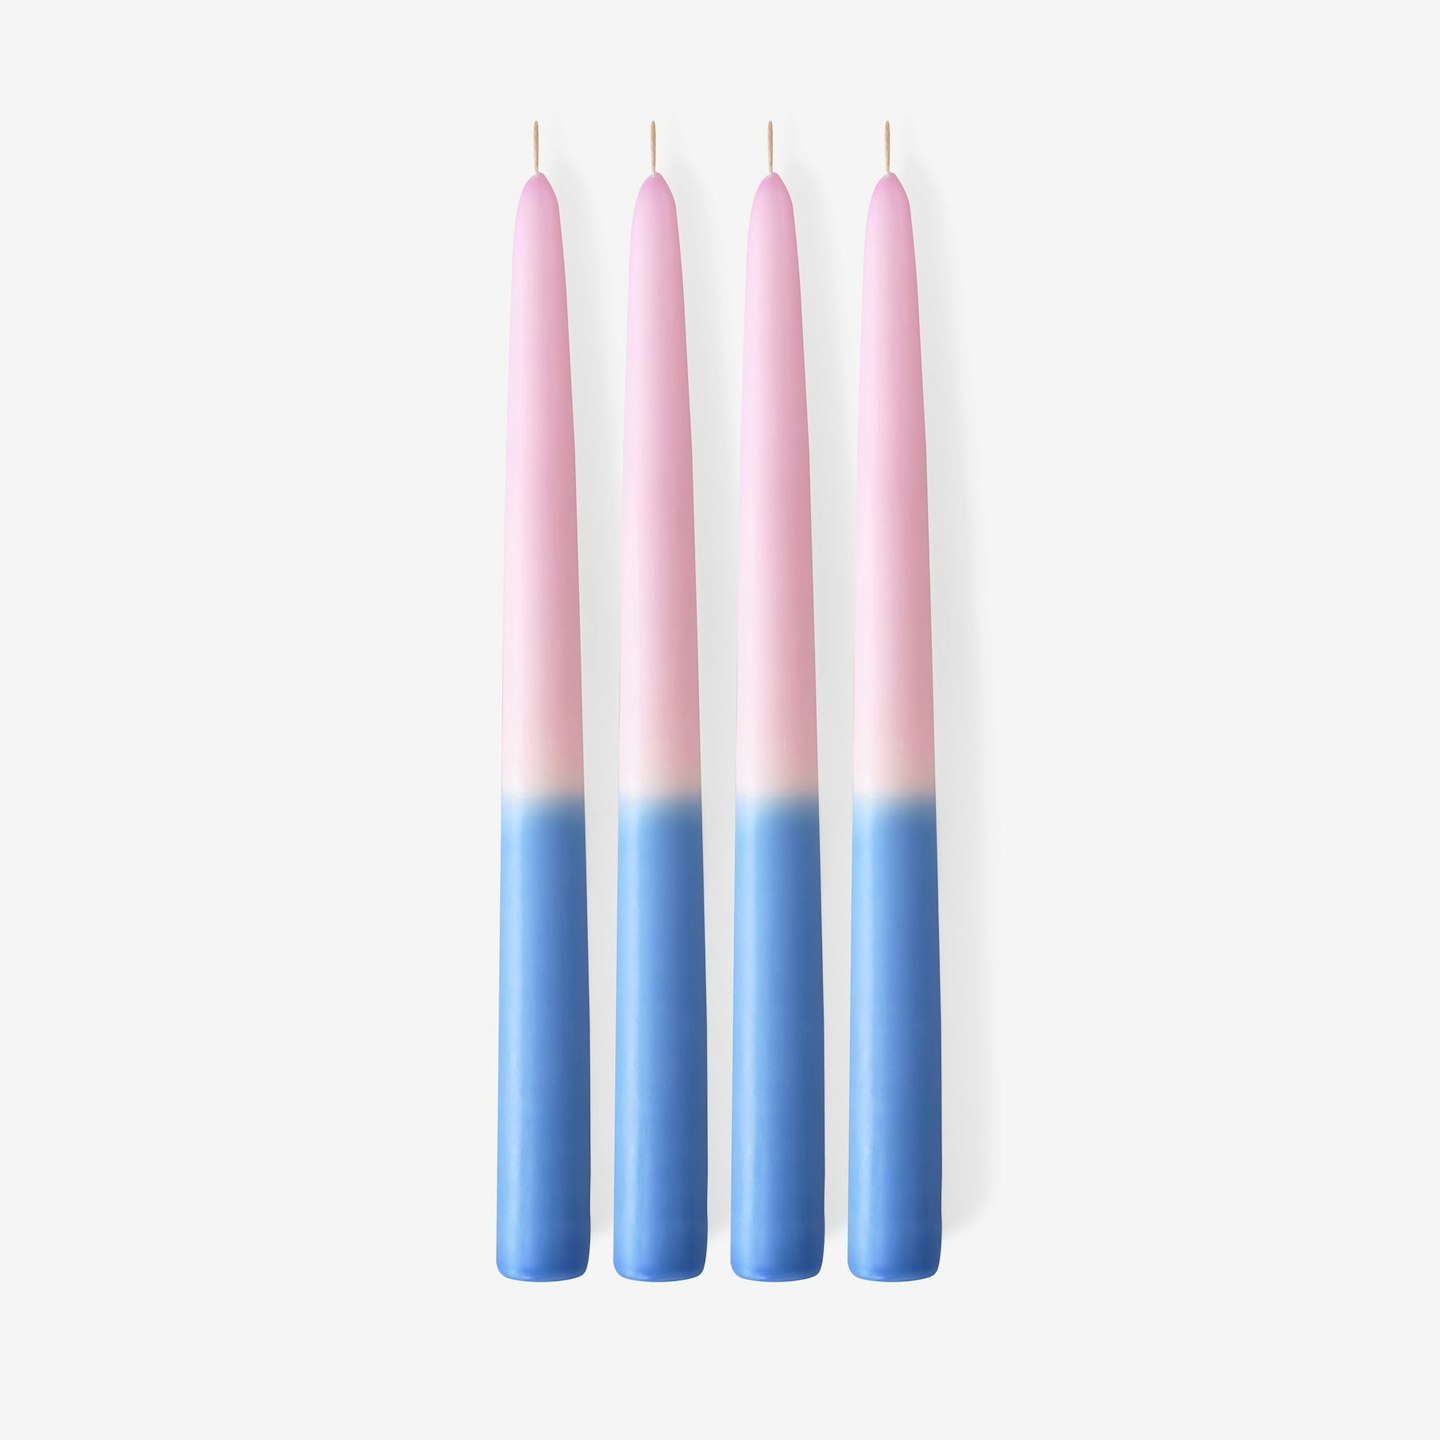 Ombre Candles